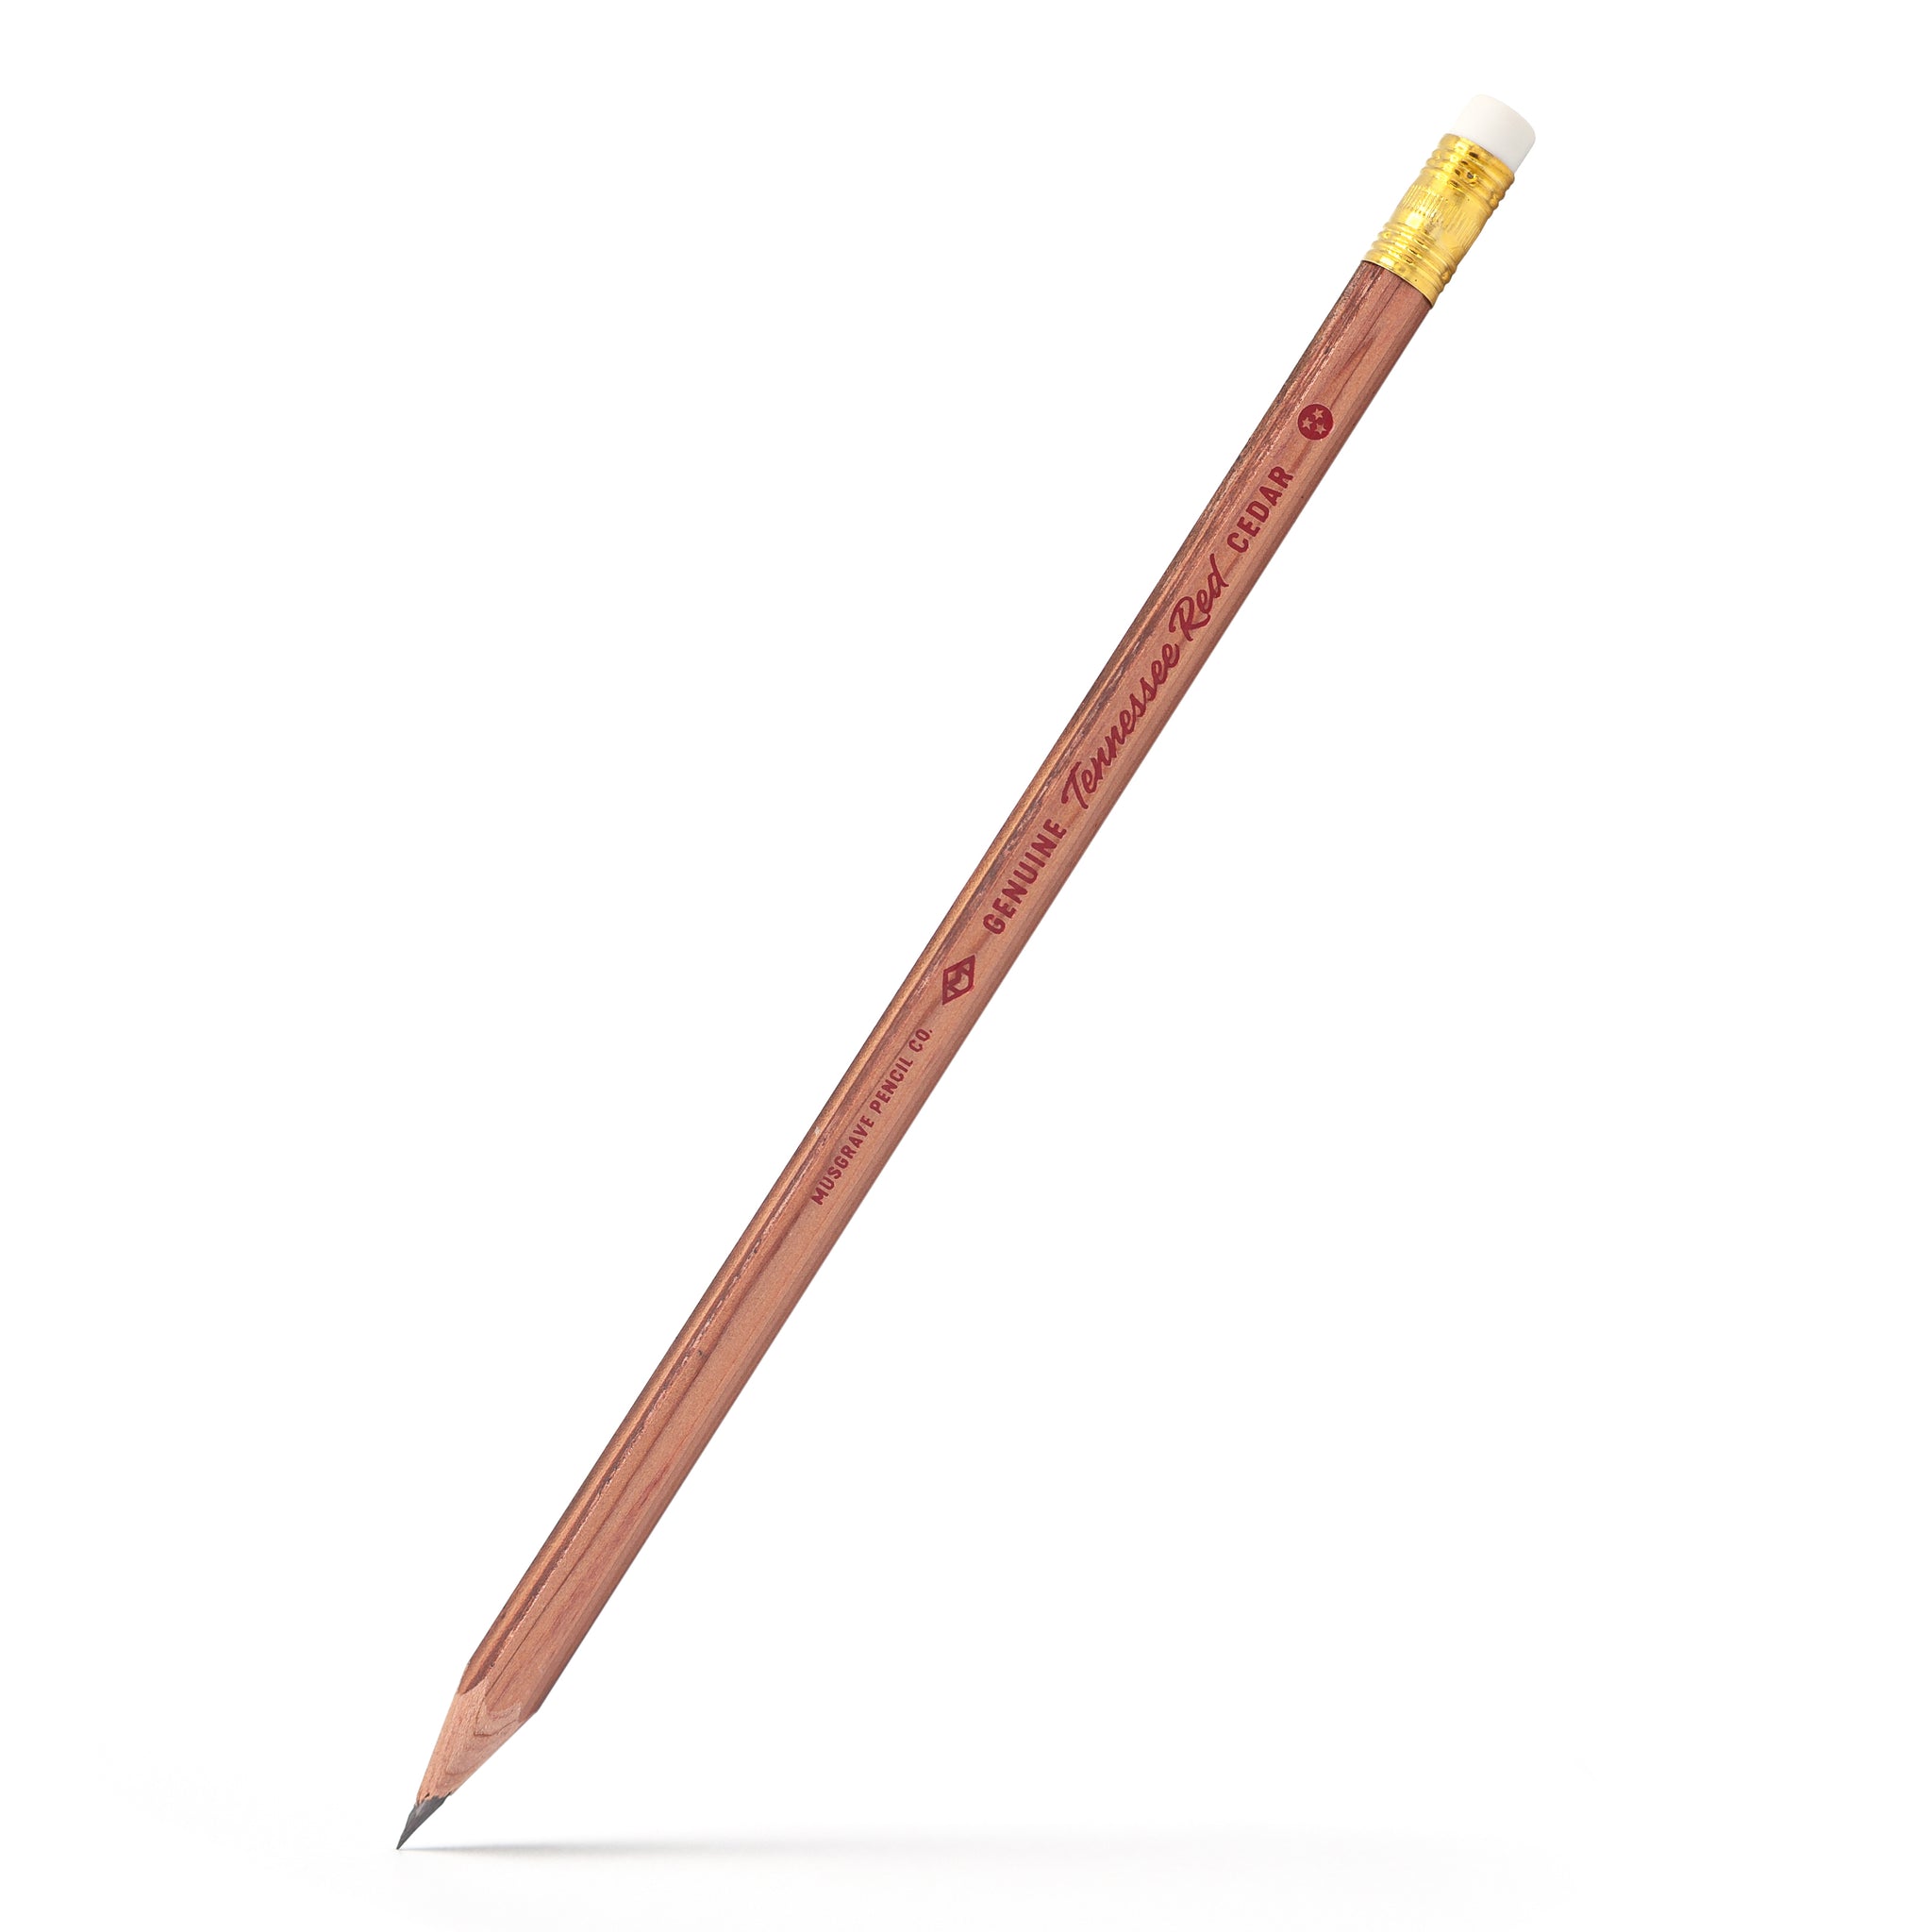 package of pencils